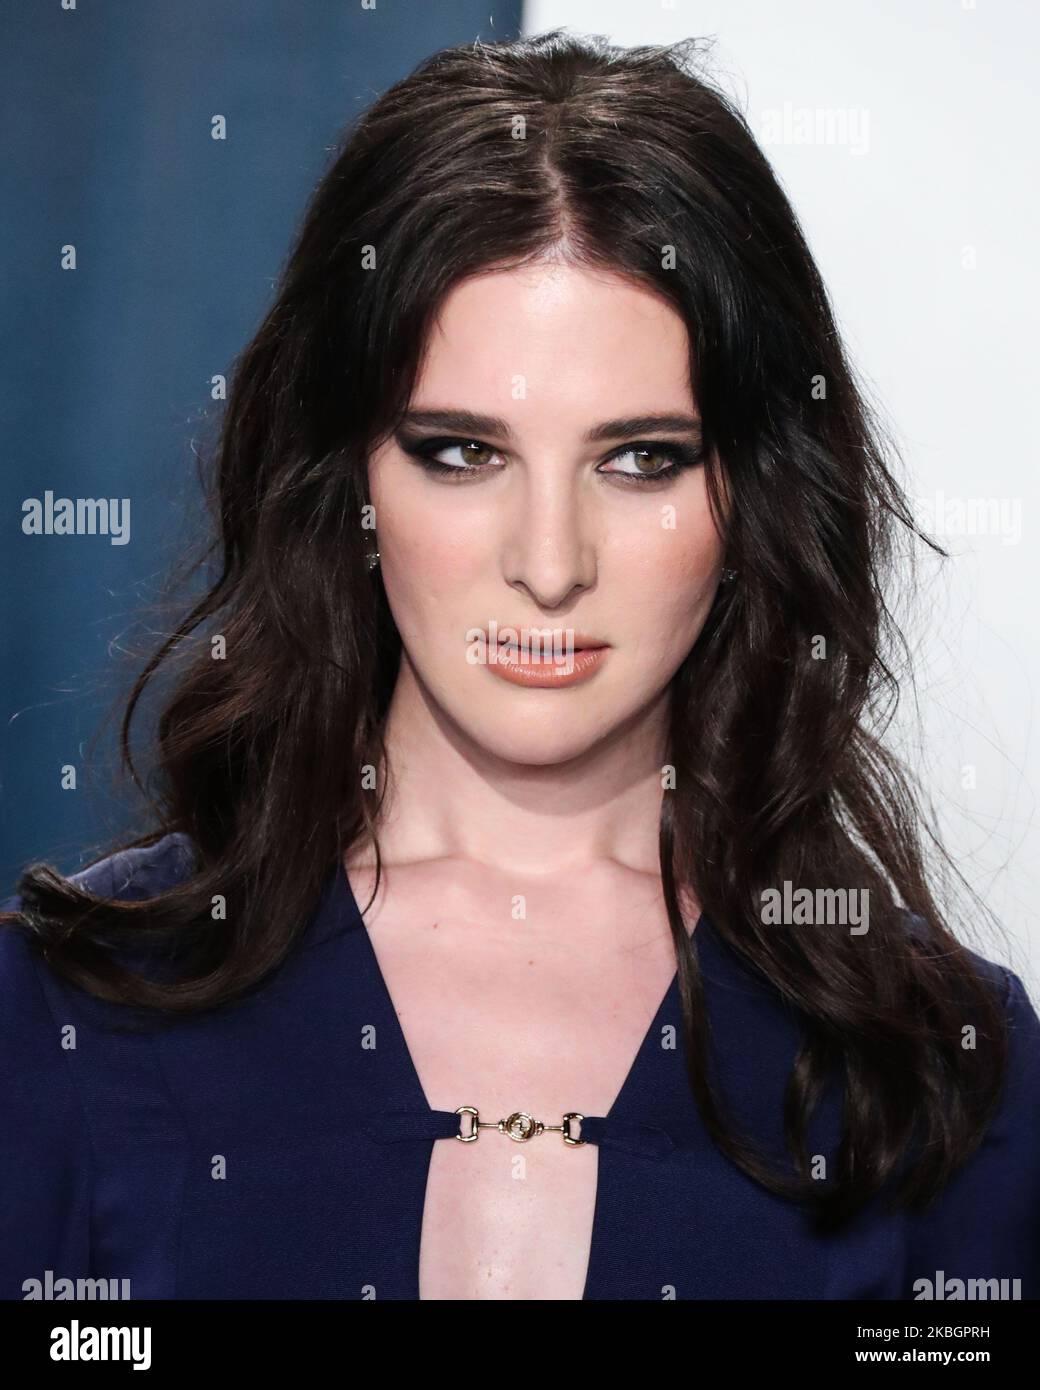 BEVERLY HILLS, LOS ANGELES, CALIFORNIA, USA - FEBRUARY 09: Hari Nef arrives at the 2020 Vanity Fair Oscar Party held at the Wallis Annenberg Center for the Performing Arts on February 9, 2020 in Beverly Hills, Los Angeles, California, United States. (Photo by Xavier Collin/Image Press Agency/NurPhoto) Stock Photo